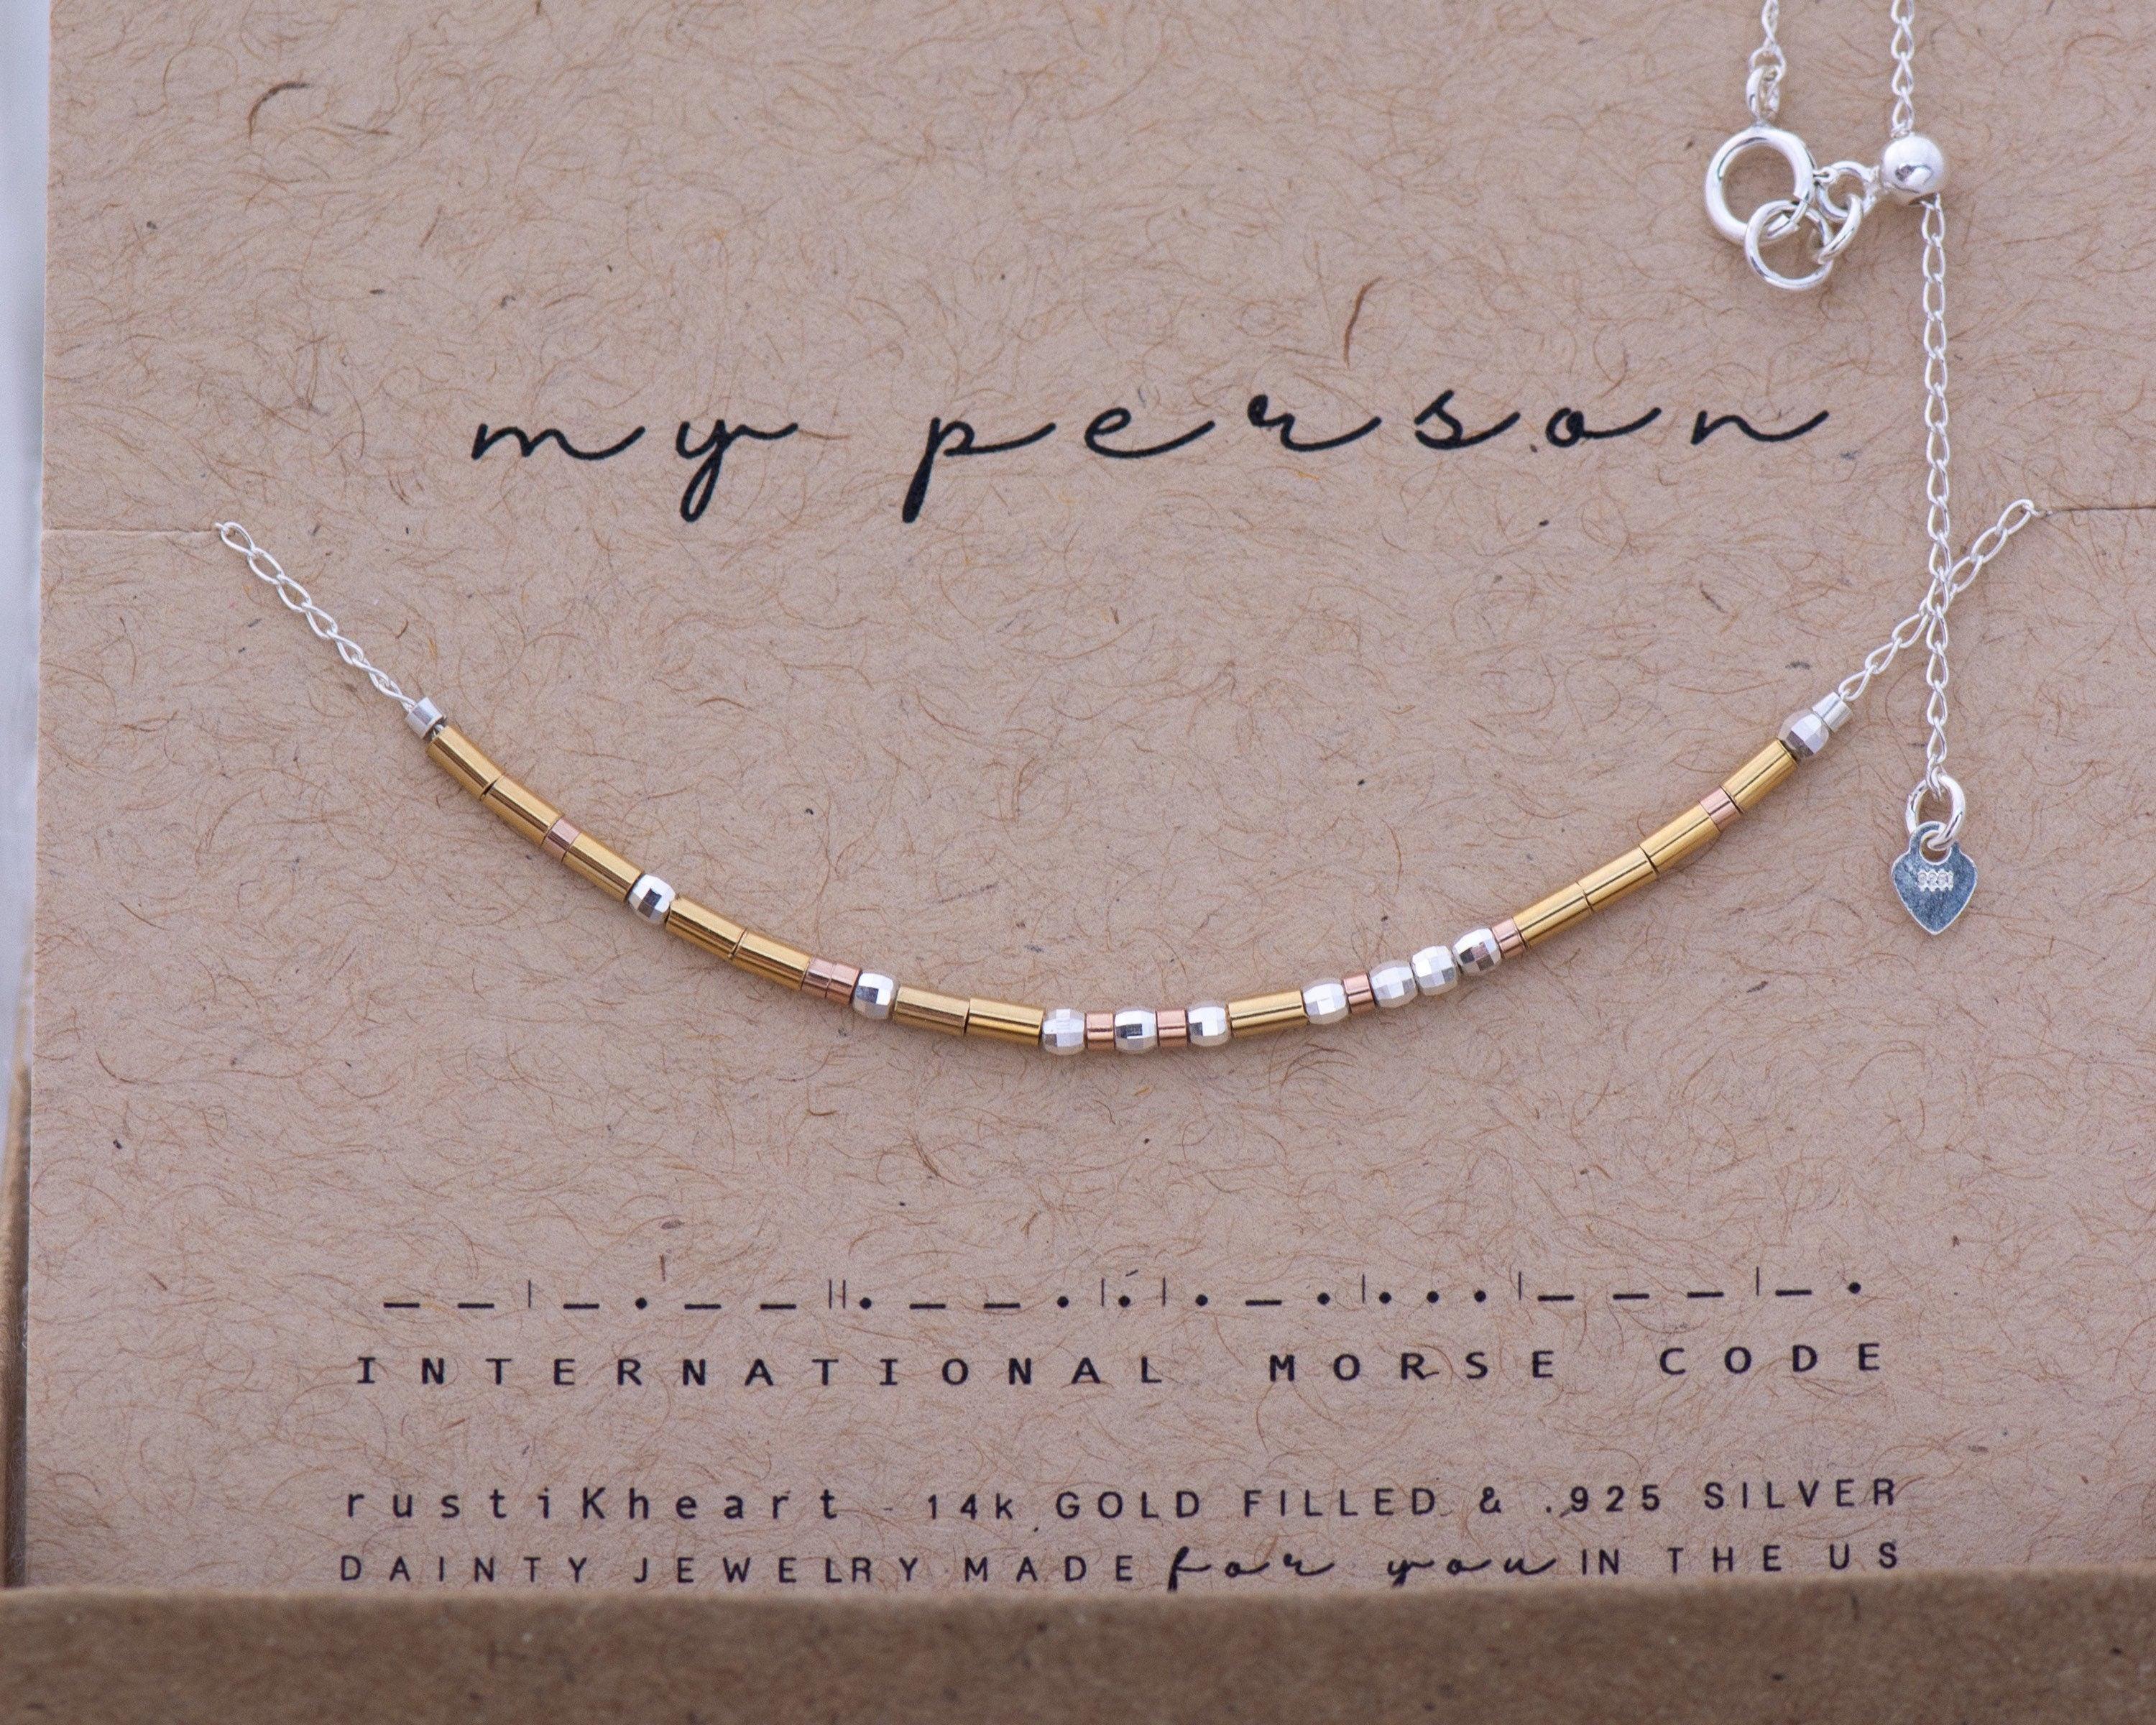 My Person Morse Code Necklace • AX.SD.YT.R1.S - Morse and Dainty